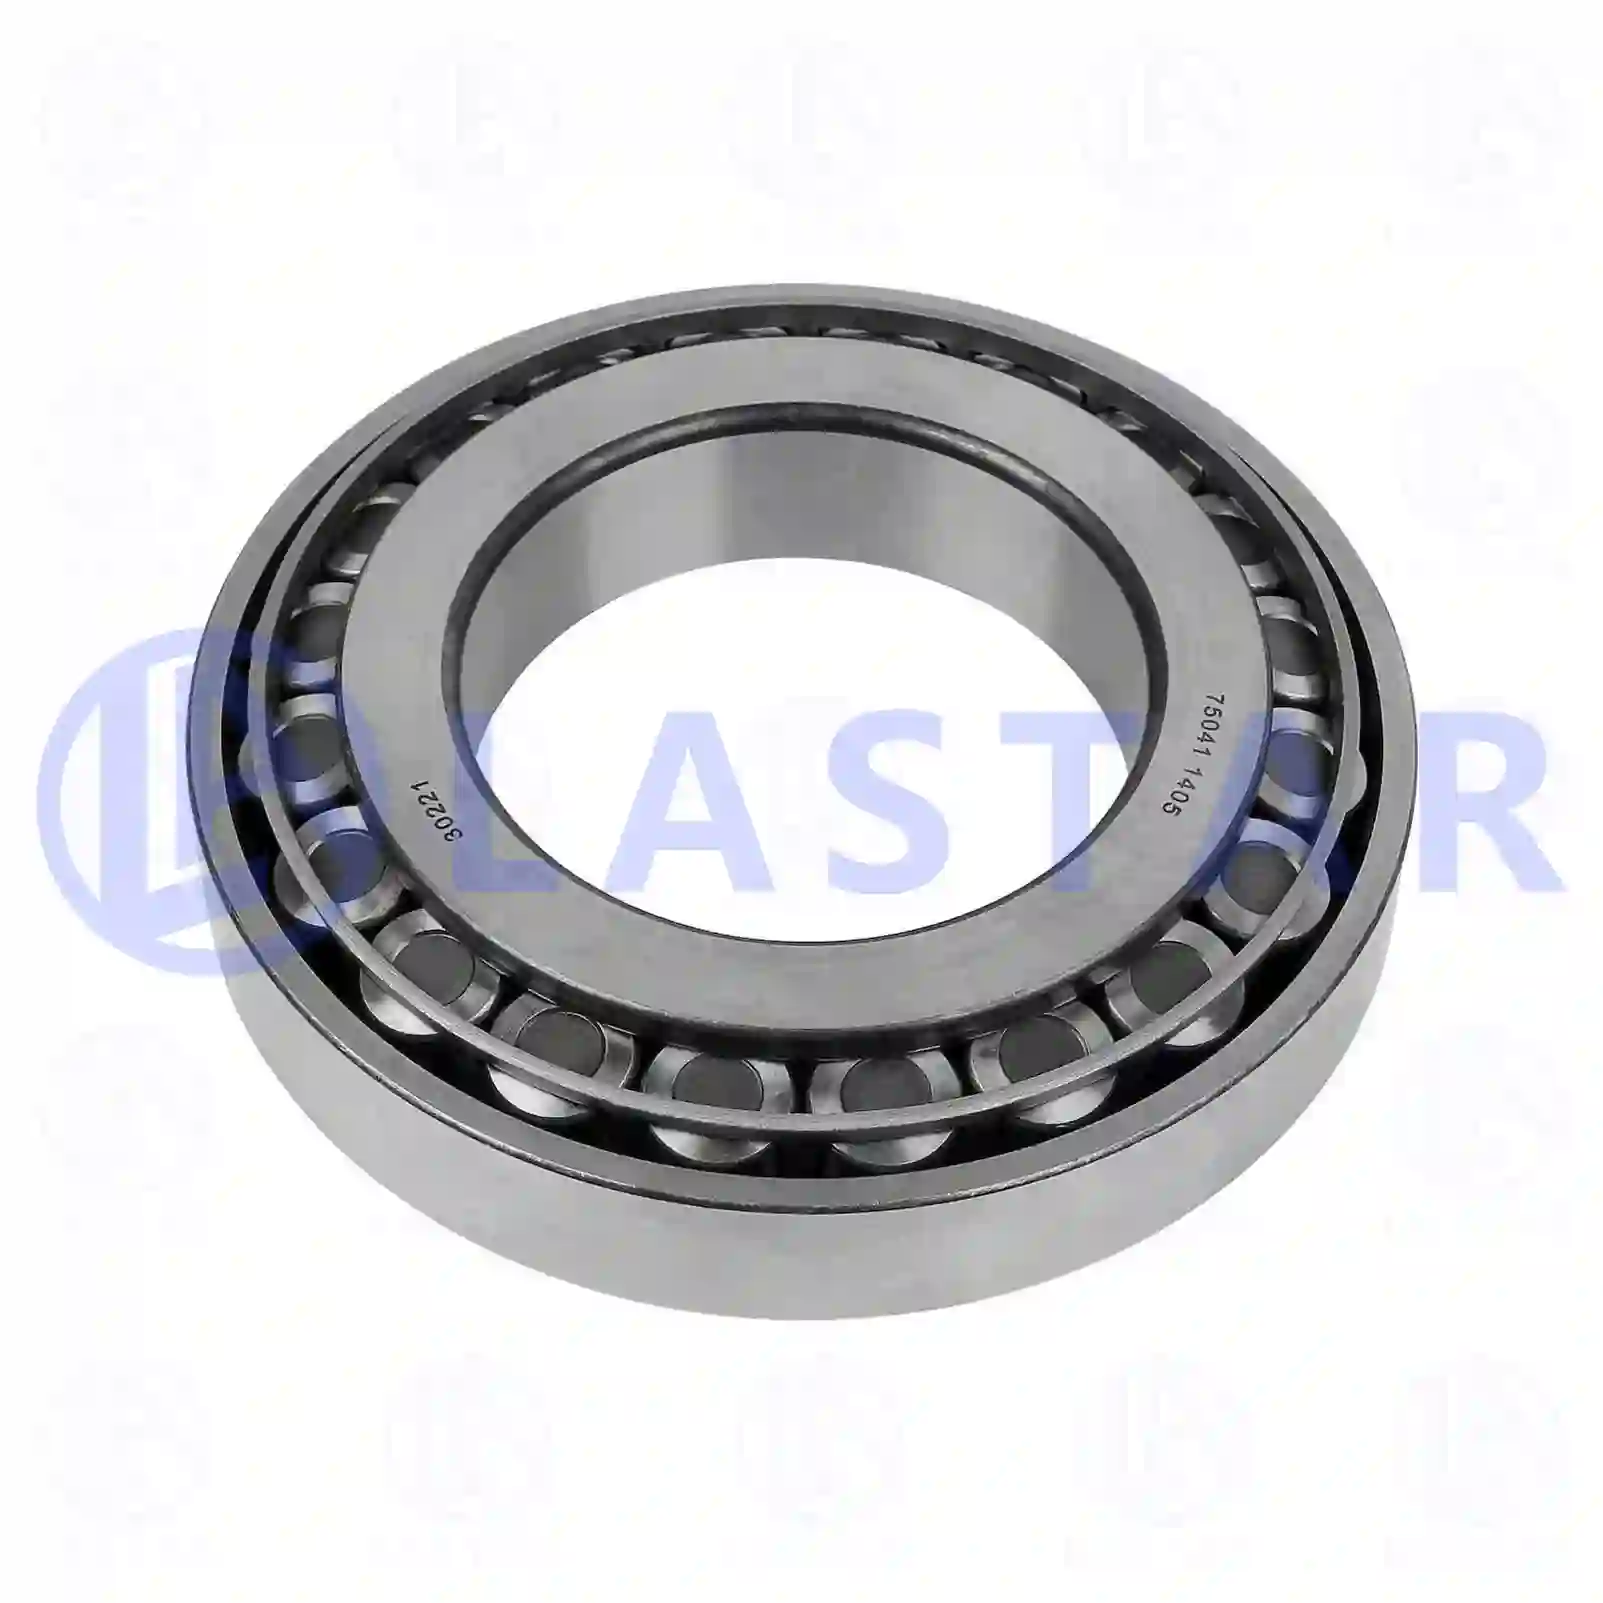 Hub Tapered roller bearing, la no: 77726586 ,  oem no:01102864, 01102864, 1102864, 0023430221, 5000020631 Lastar Spare Part | Truck Spare Parts, Auotomotive Spare Parts